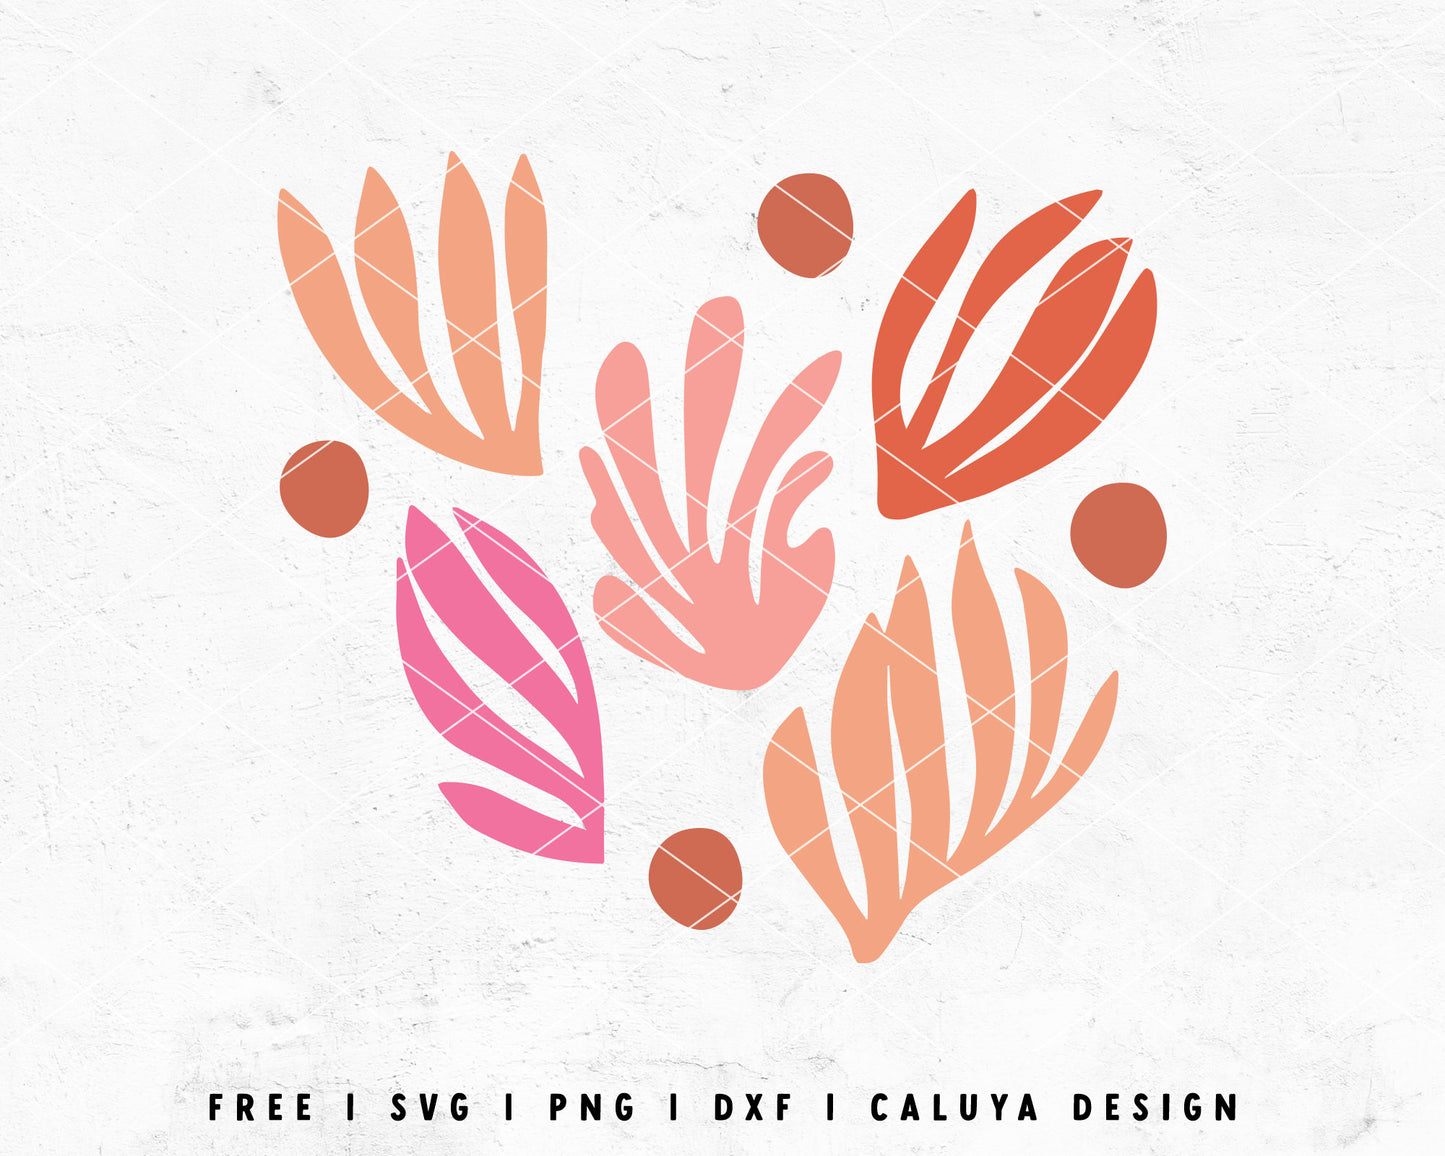 FREE Abstract Botanical SVG | Matisse Inspired SVG Cut File for Cricut, Cameo Silhouette | Free SVG Cut File